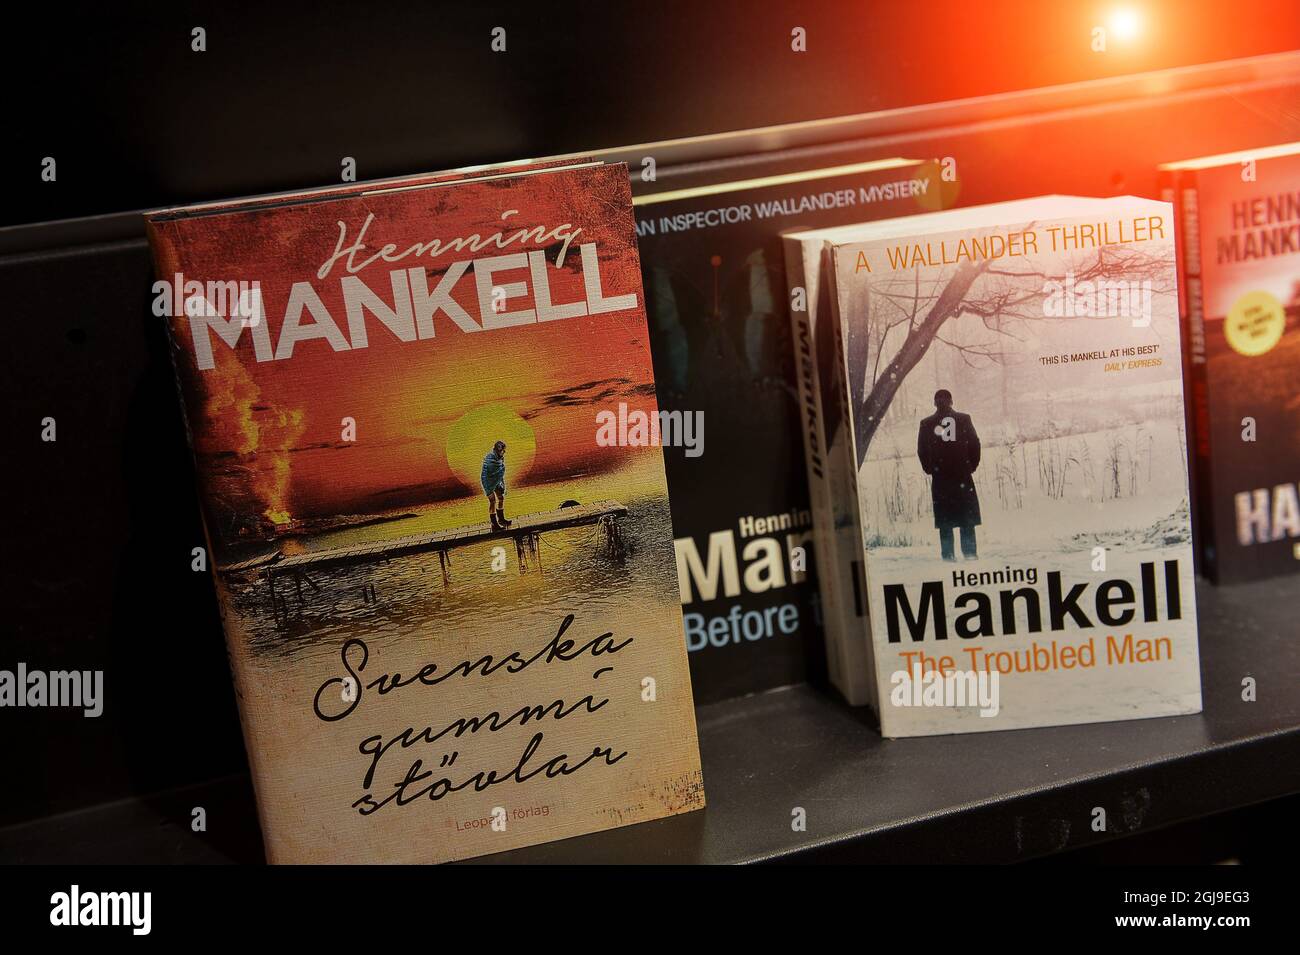 STOCKHOLM 2015-10-05 Some of Henning Mankells books on a shelf in a book store in Stockholm, Sweden, October 5, 2015. Henning Mankell died Monday. Henning Mankell was a Swedish crime writer, political activist and dramatist, best known for a series of crime novels starring his most famous creation, Inspector Kurt Wallander. Wallander has been filmed both with Swedish actor Krister Henriksson and British actor Kenneth Branagh in the leading roles. Mankell was 67. Foto Jonas Ekstromer / TT / kod 10030  Stock Photo